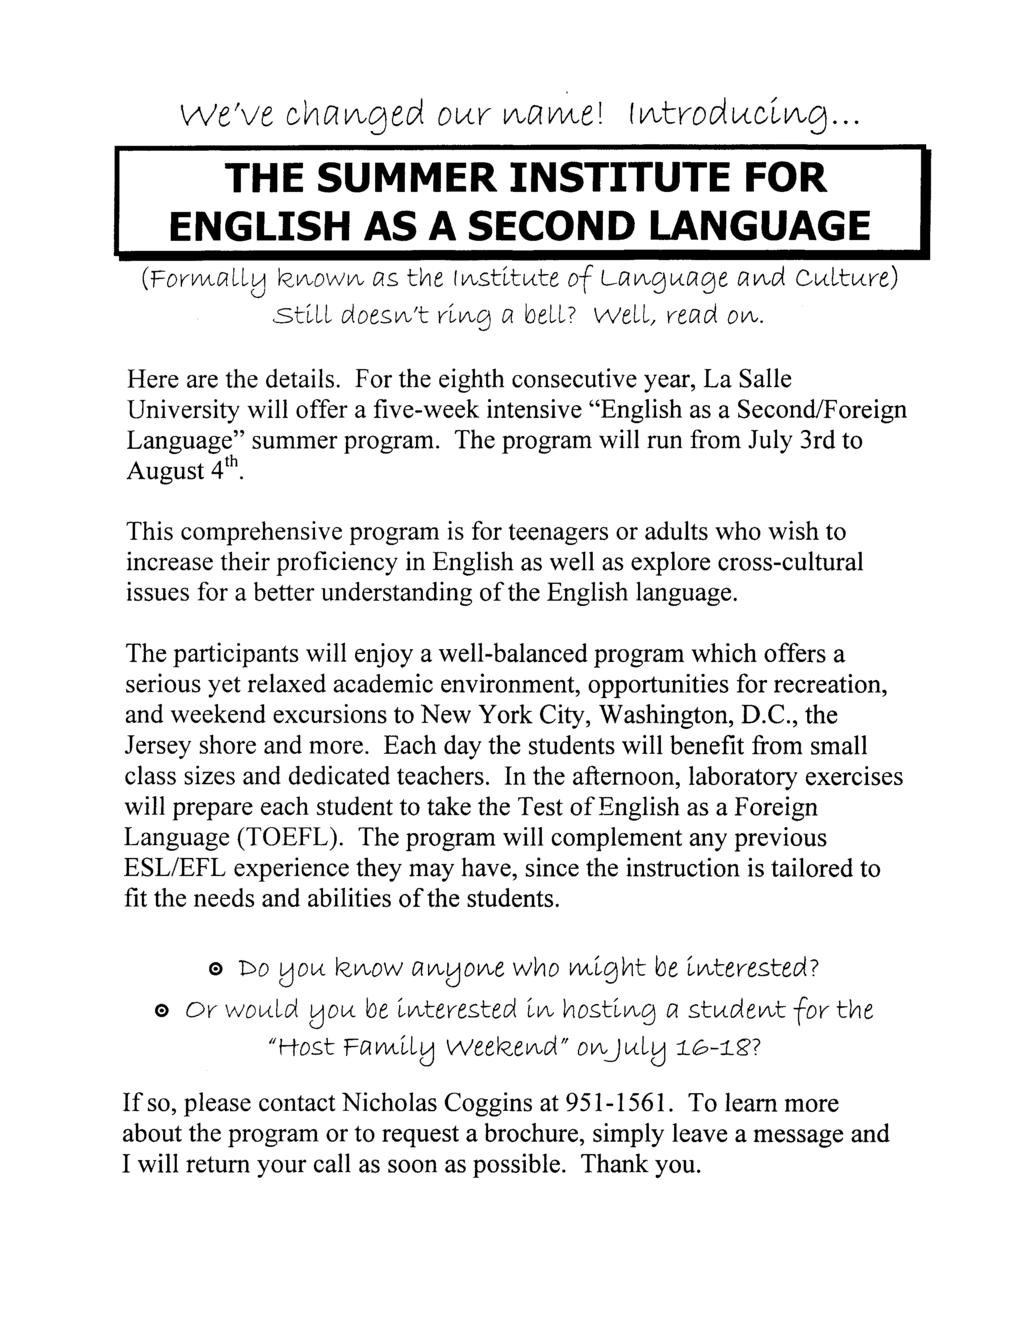 We've changed our nam e! Introducing... THE SUMMER INSTITUTE FOR ENGLISH AS A SECOND LANGUAGE (Formally k nown as the institute of Language and Cul ture) s t i l l doesn't ring a bell? well, read on.